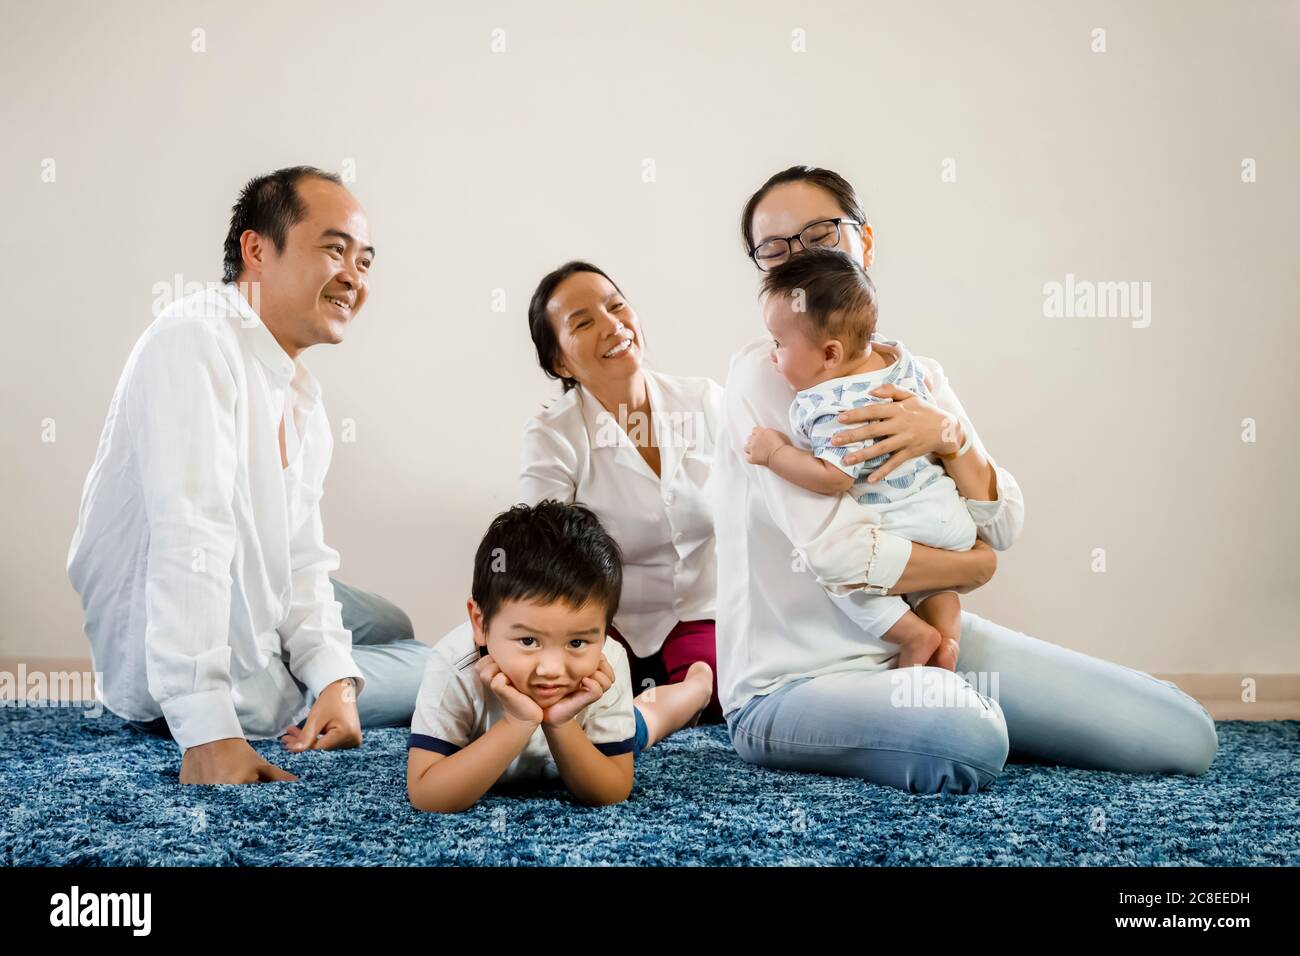 New sibling asian baby brother gets all the attention, jealous older sibling foreground with parents playing with new born younger child. asian family Stock Photo